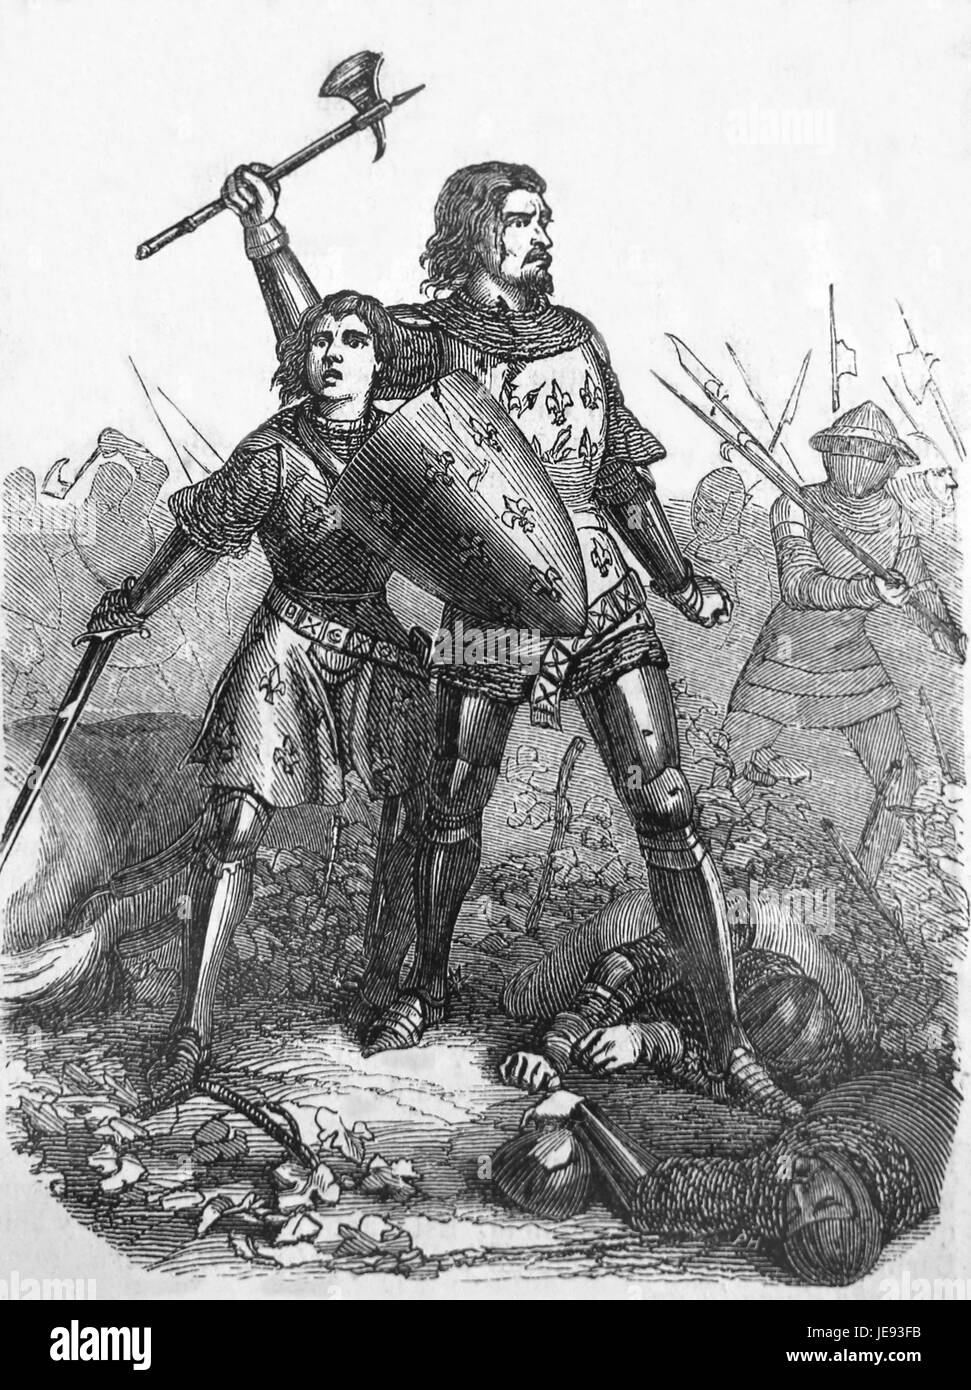 John II of France (1319-1364) 14th. Century and his son Philip II, Duke of Burguyndy captured in the Battle of Poitiers (1356). Stock Photo